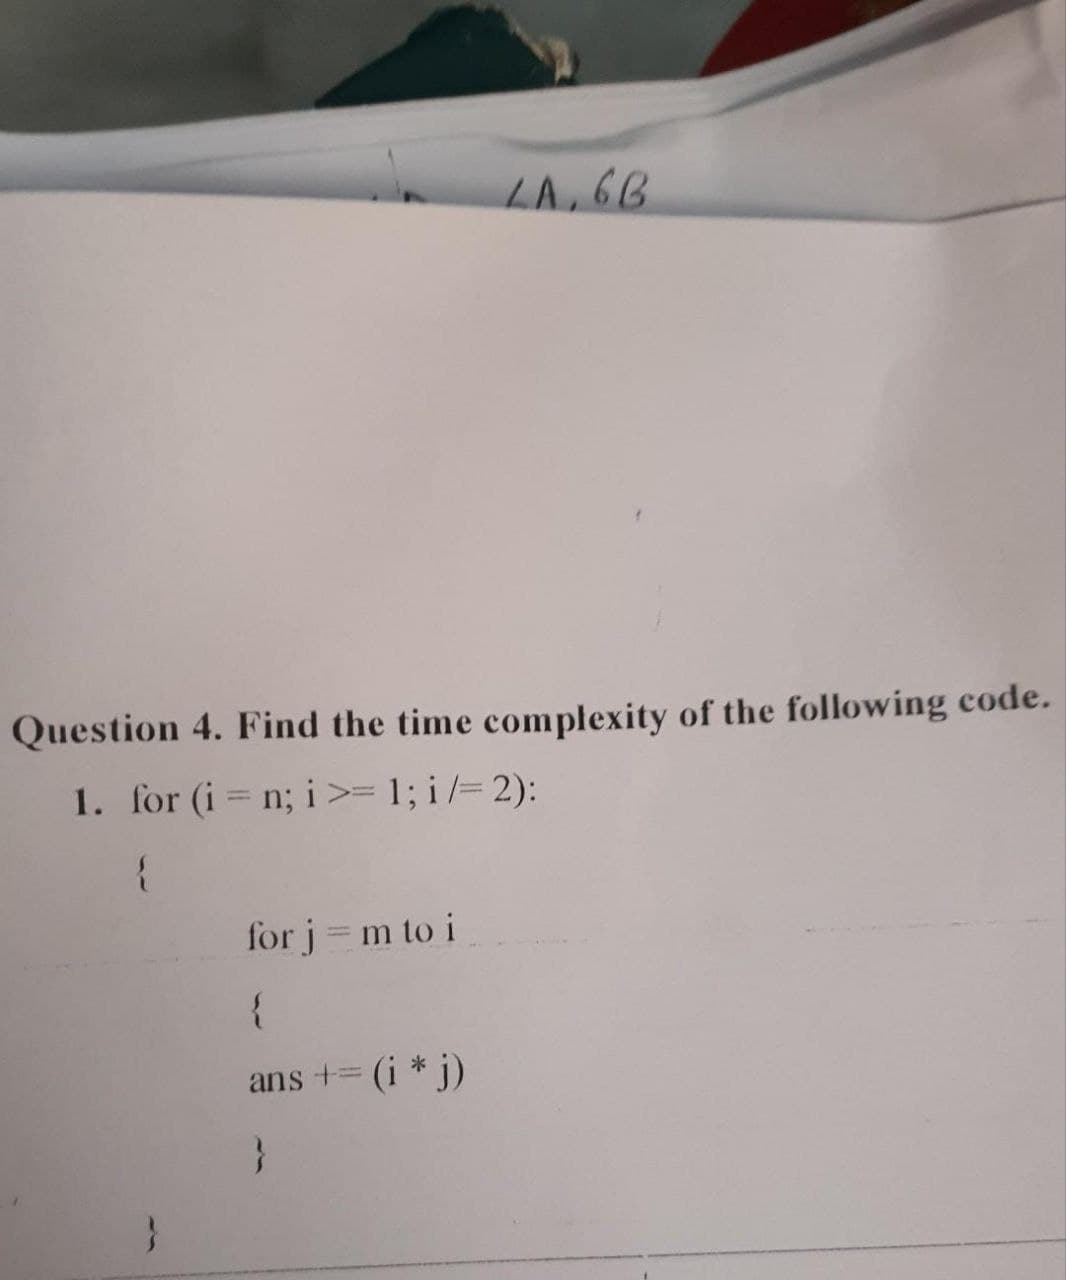 Question 4. Find the time complexity of the following code.
1. for (i = n; i >= 1; i/= 2):
{
}
LA, 6B
for j = m to i
{
ans += (i * j)
}